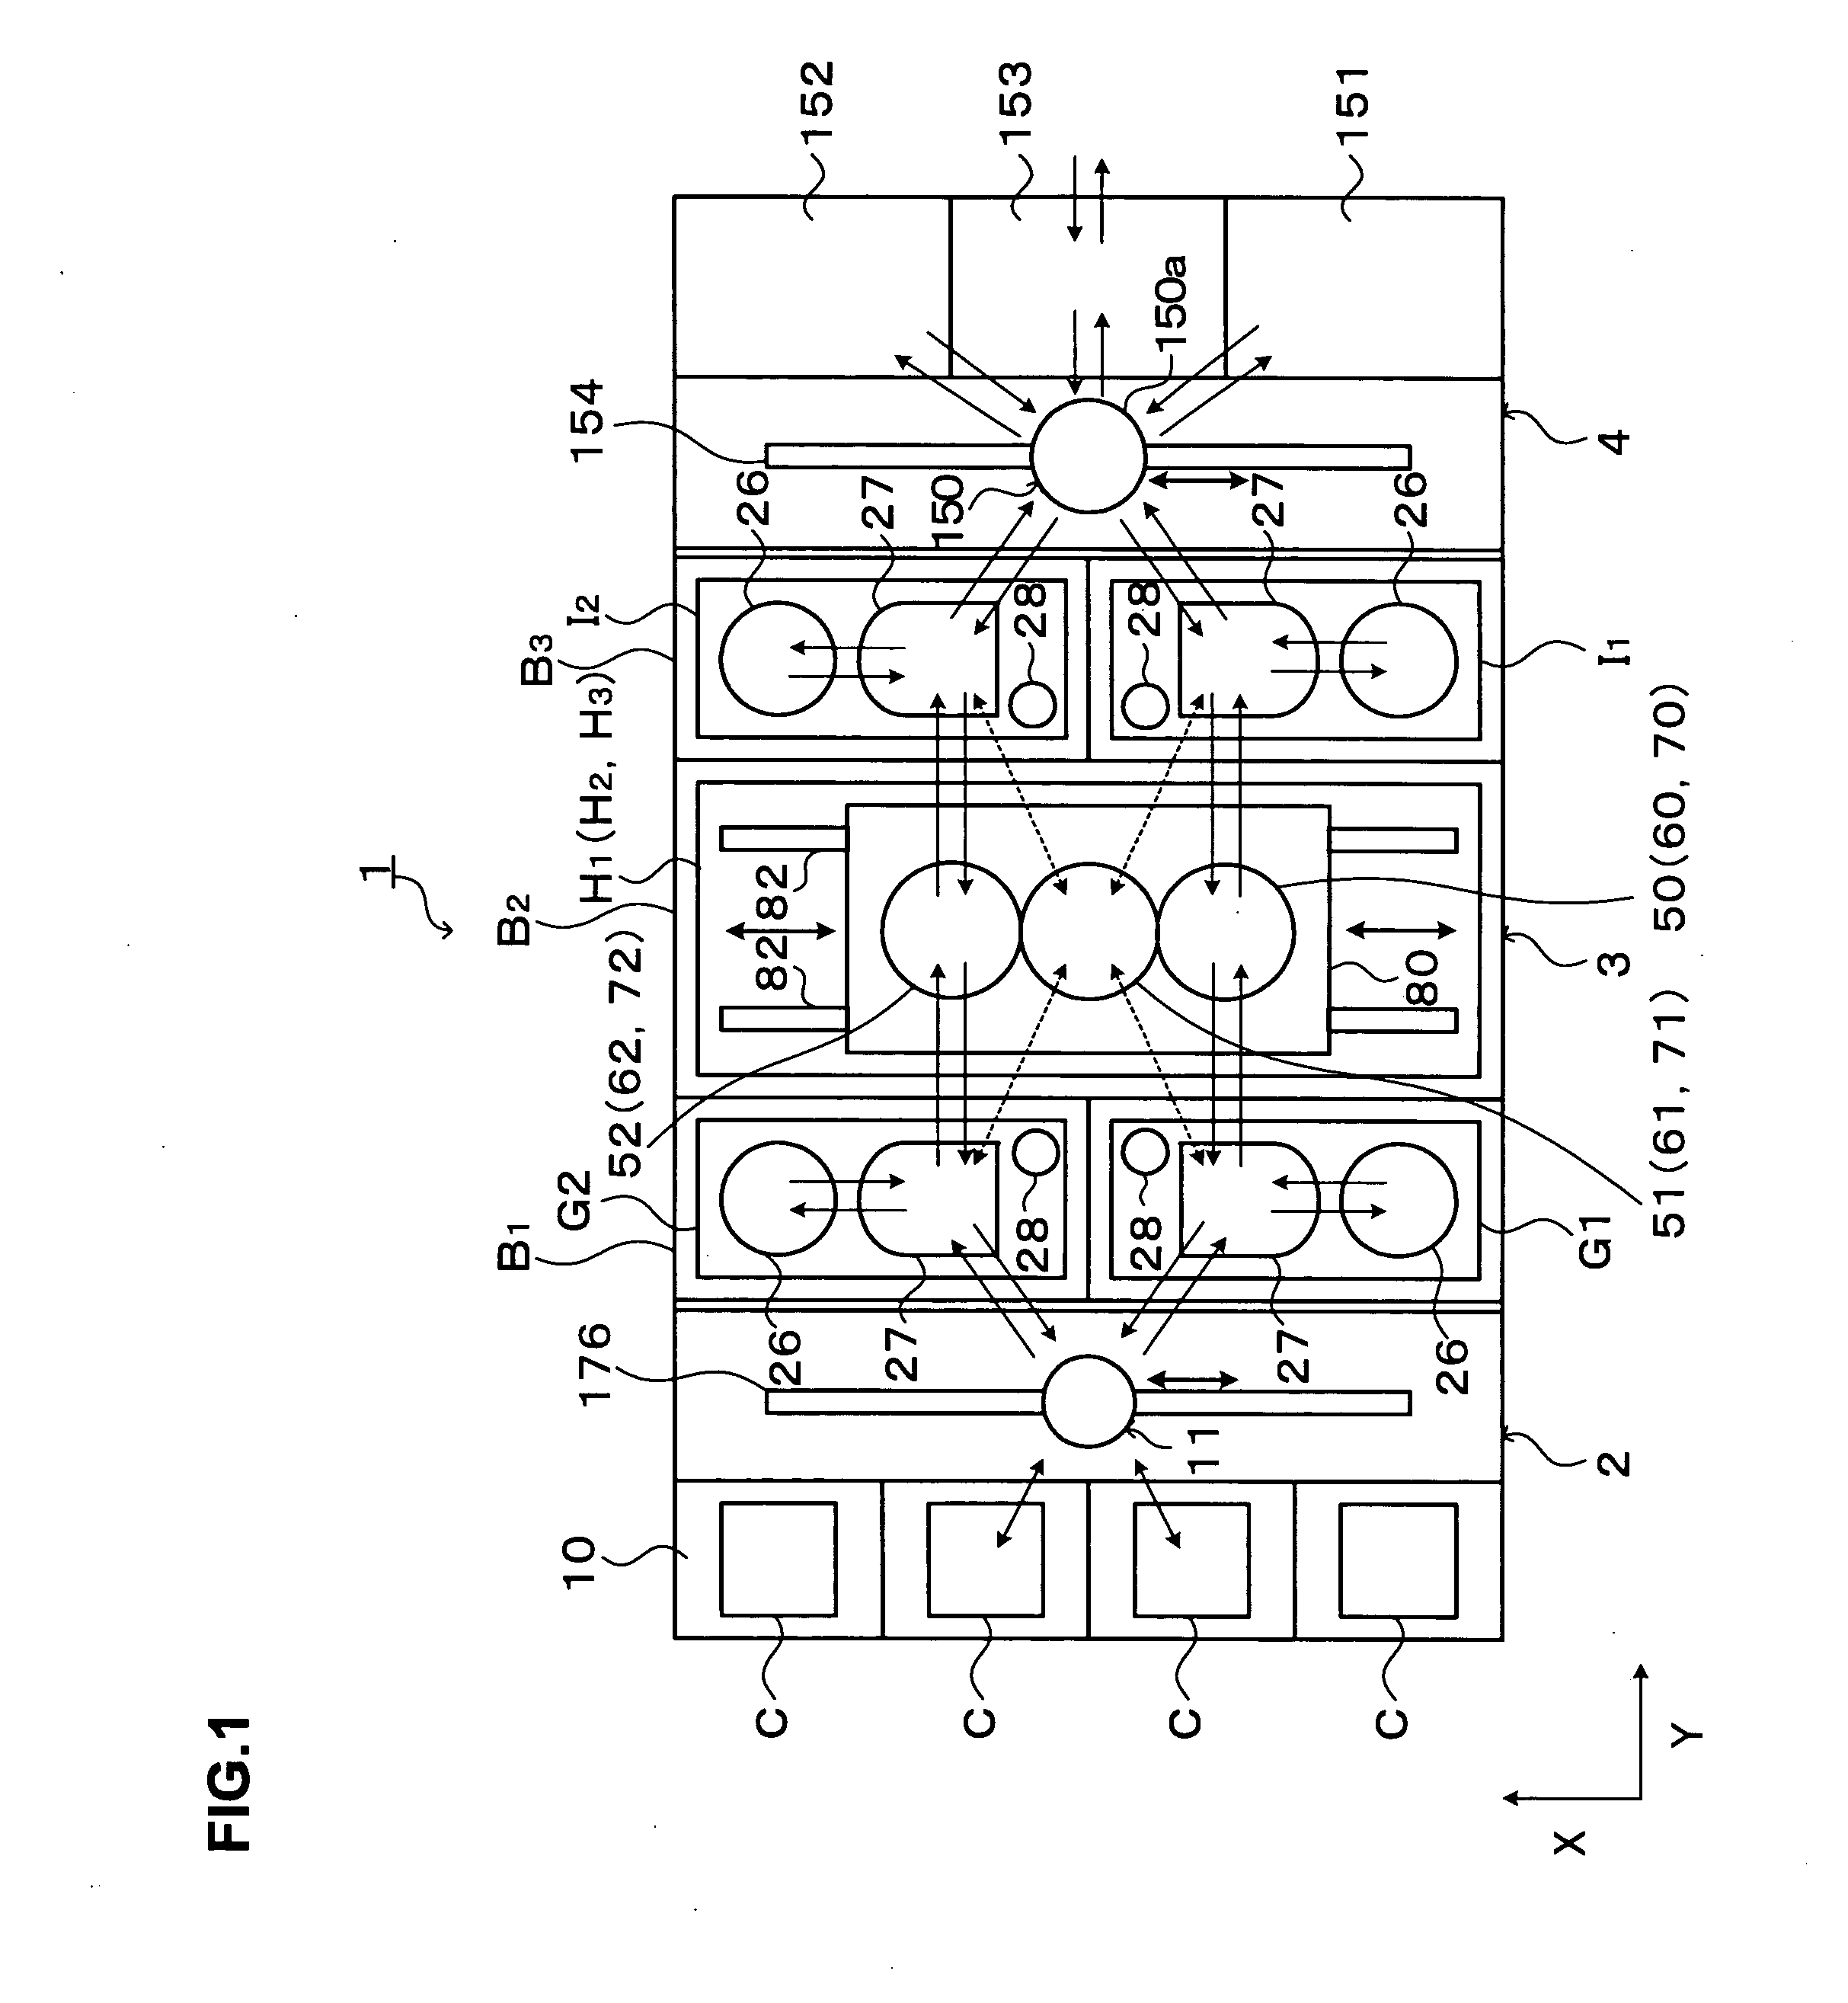 Substrate carrier